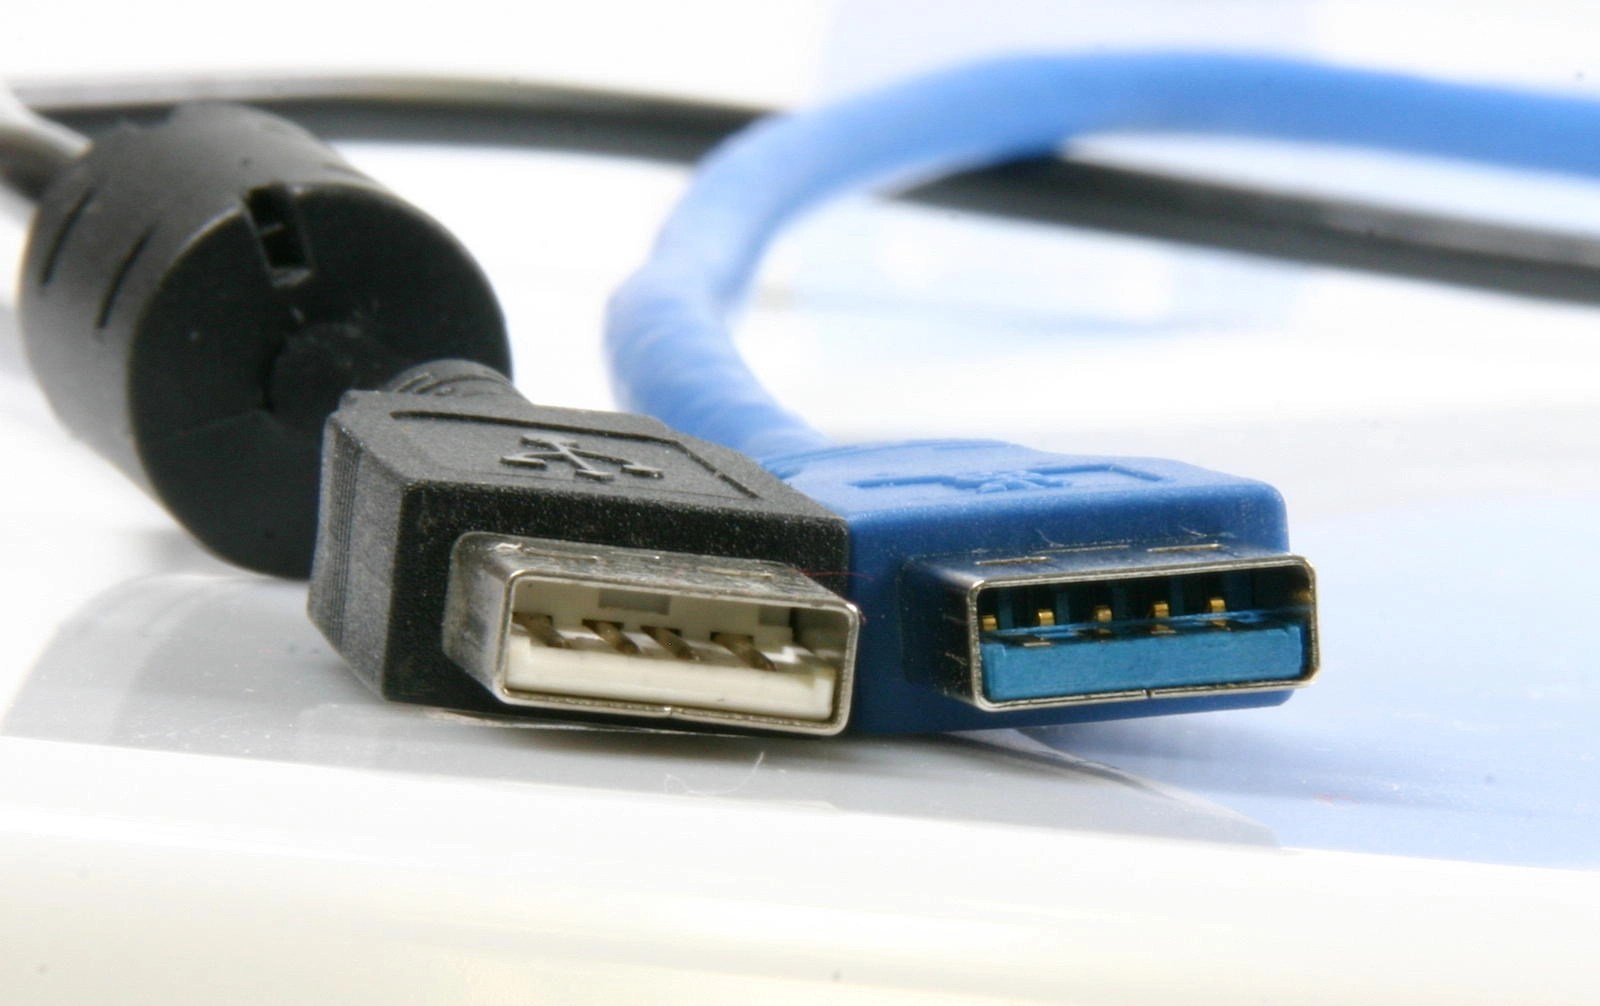 USB 2.0 Vs. USB 3.0: What is the Difference?